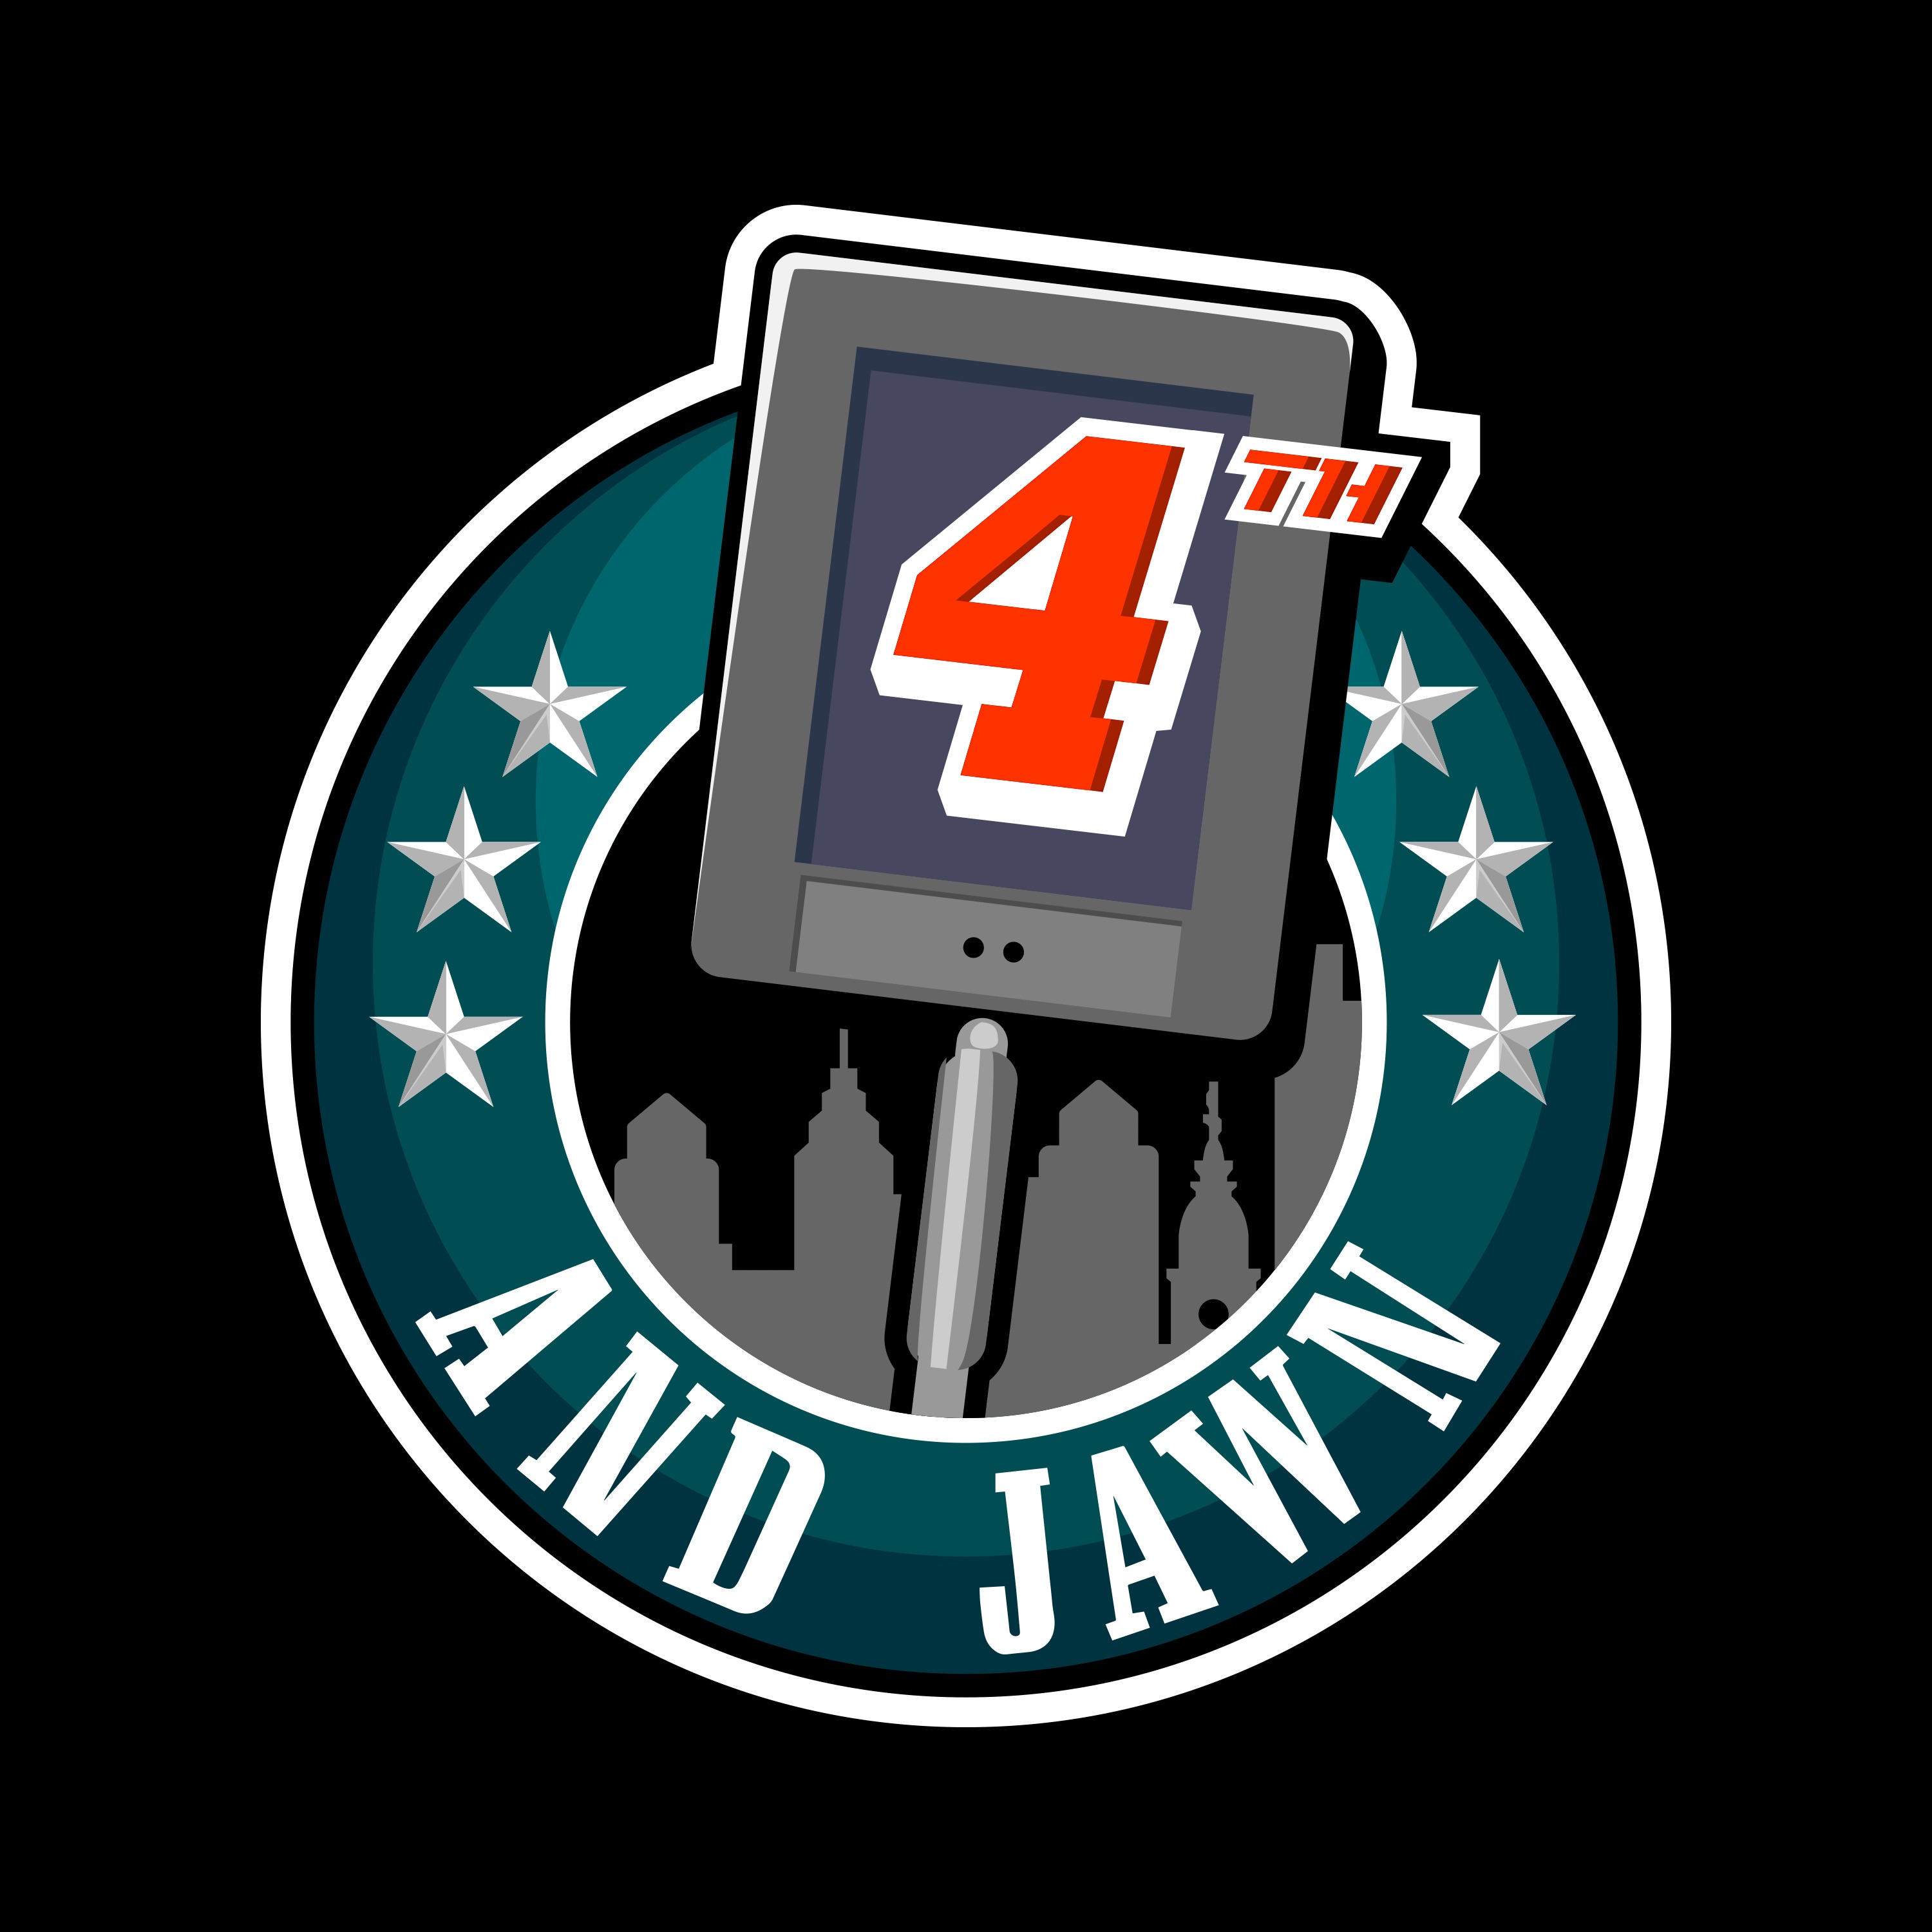 4th and Jawn Episode 324: Jalen or Minshew - Eagles vs Cowboys preview